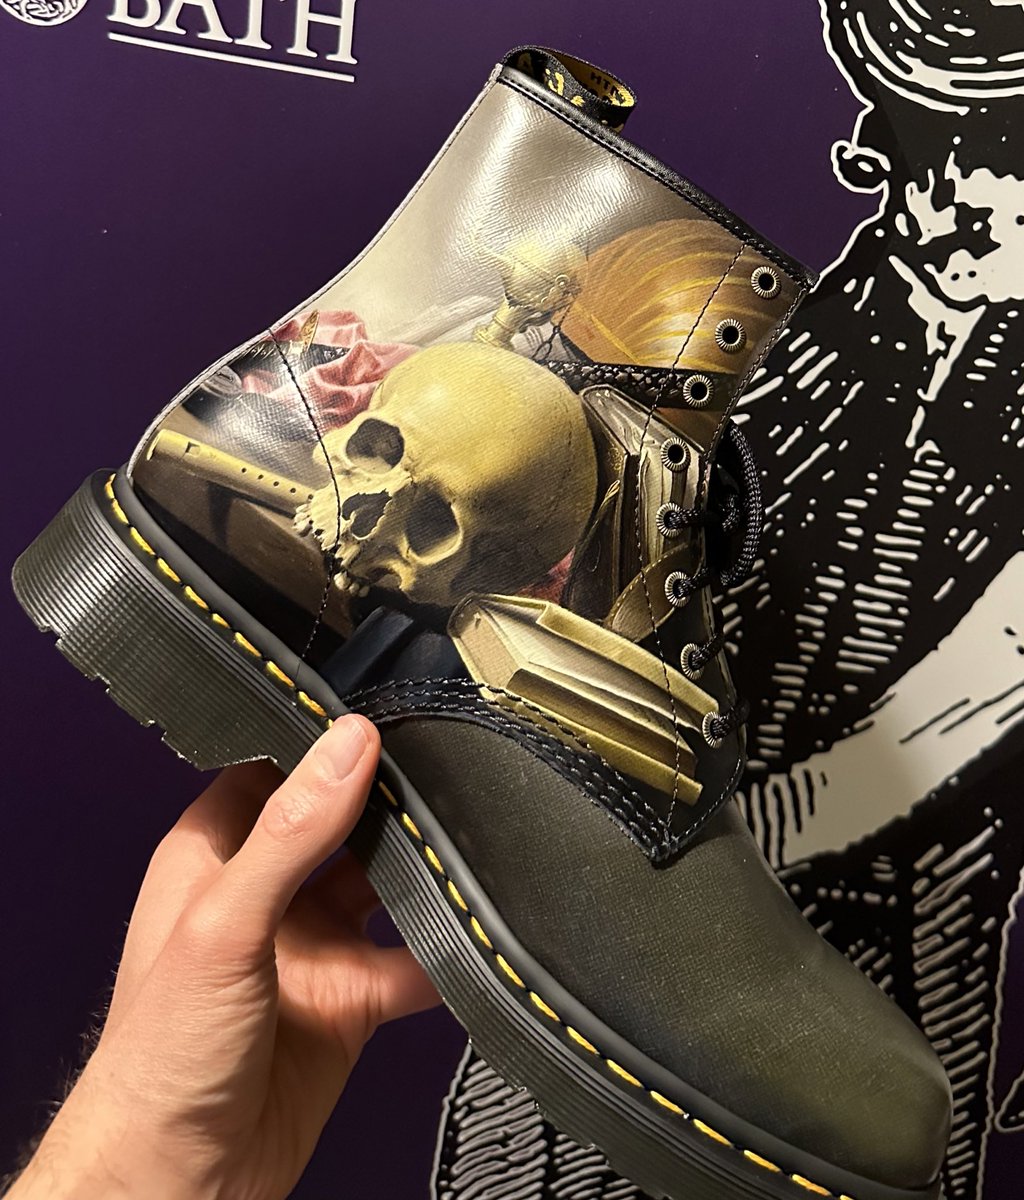 This death historian is now the proud owner of a pair of @NationalGallery x @drmartens boots. Featuring Harmen Steenwyck’s Still Life: An Allegory on the Vanities of Human Life #mementomori #vanitas